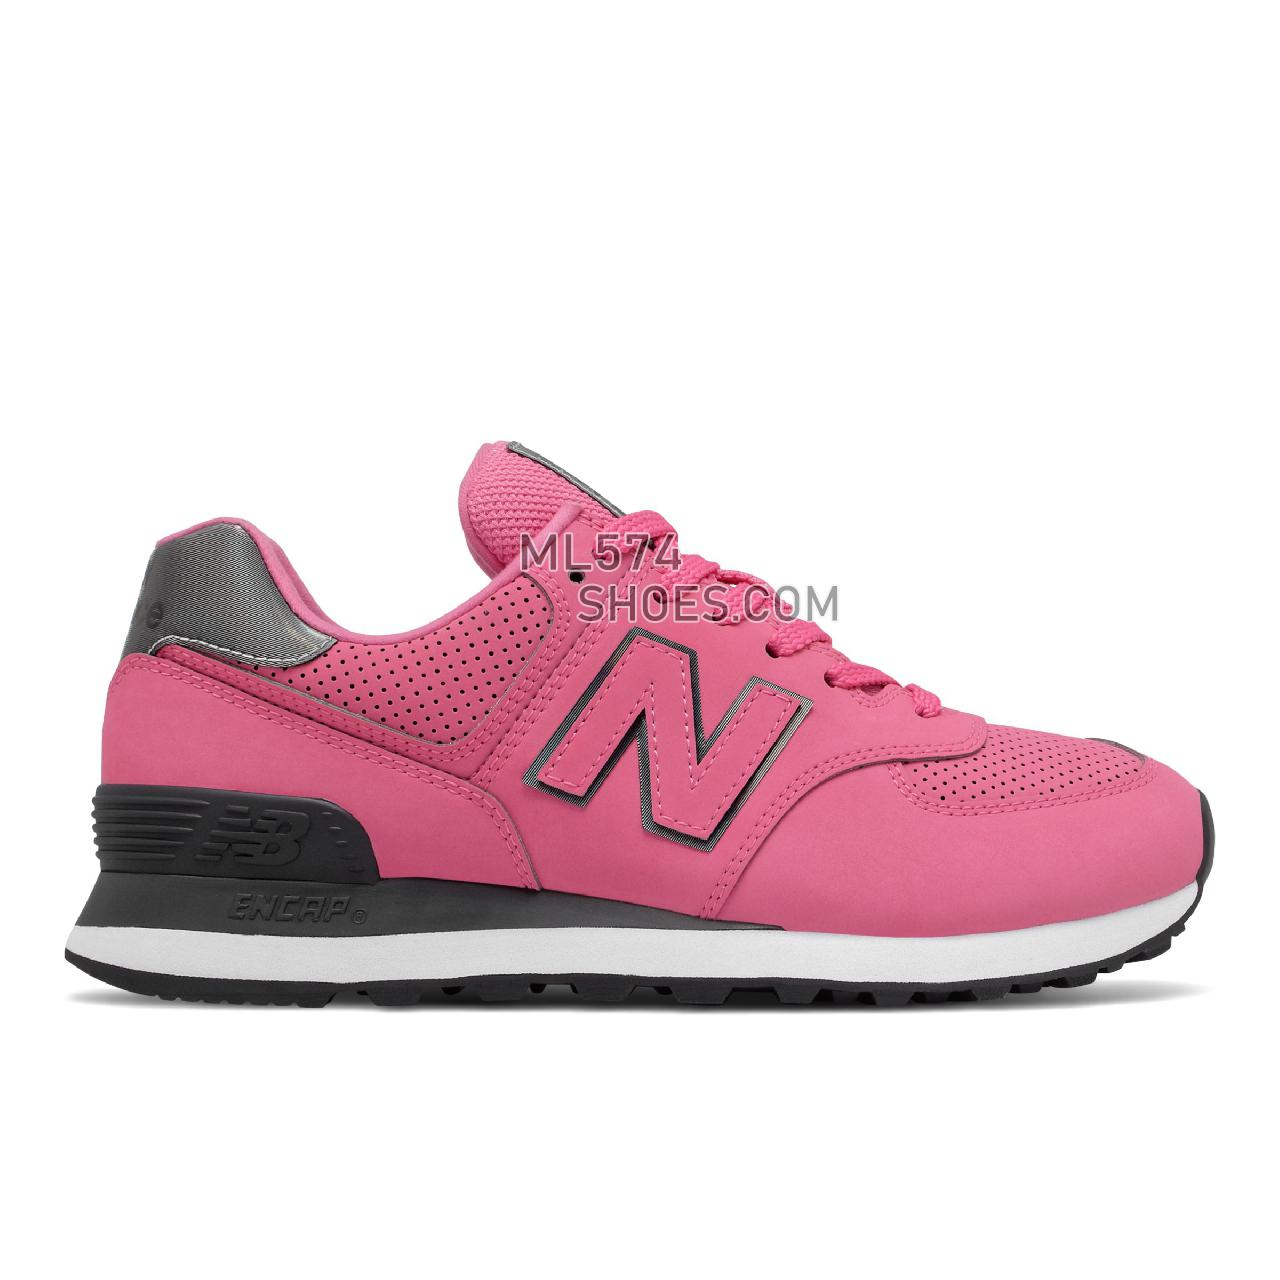 New Balance 574 - Women's Classic Sneakers - Sporty Pink with Black - WL574DT2